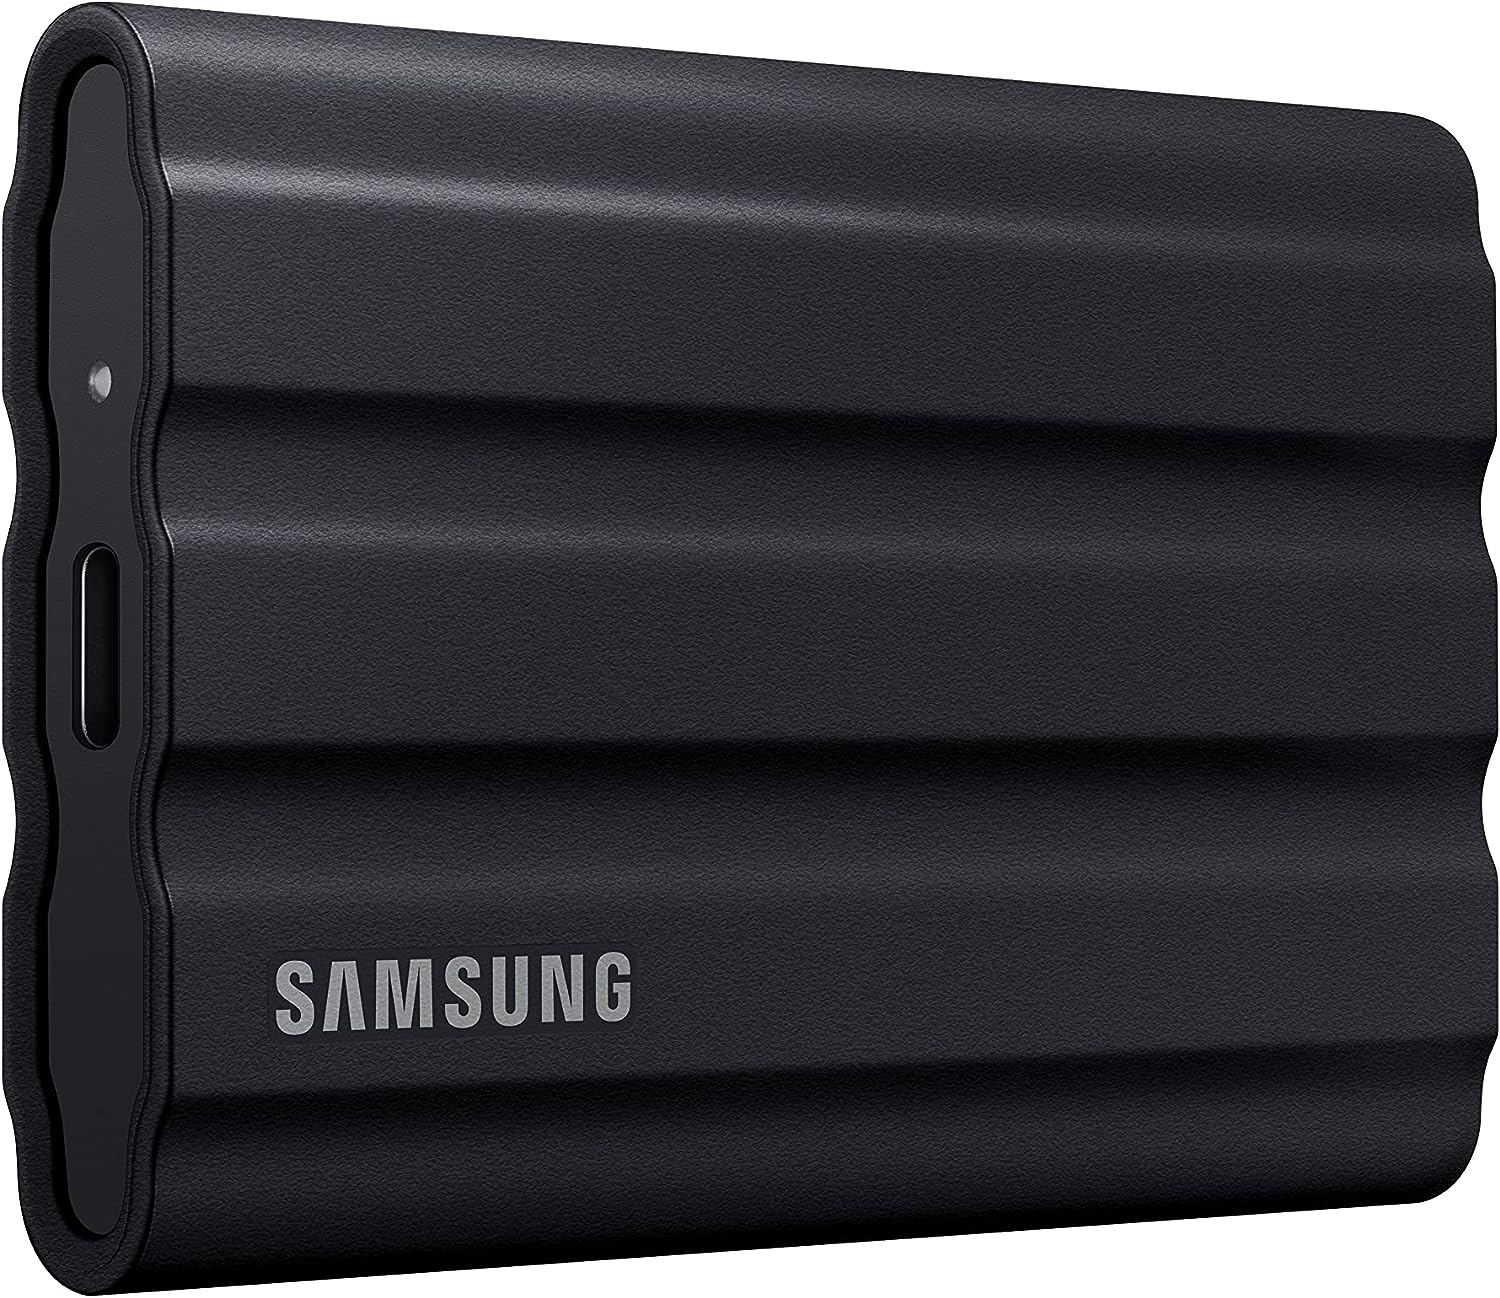 Amazon Prime: SAMSUNG T7 Shield 4TB, Portable SSD, up-to 1050MB/s, USB 3.2 Gen2, Rugged, Black, $199.99